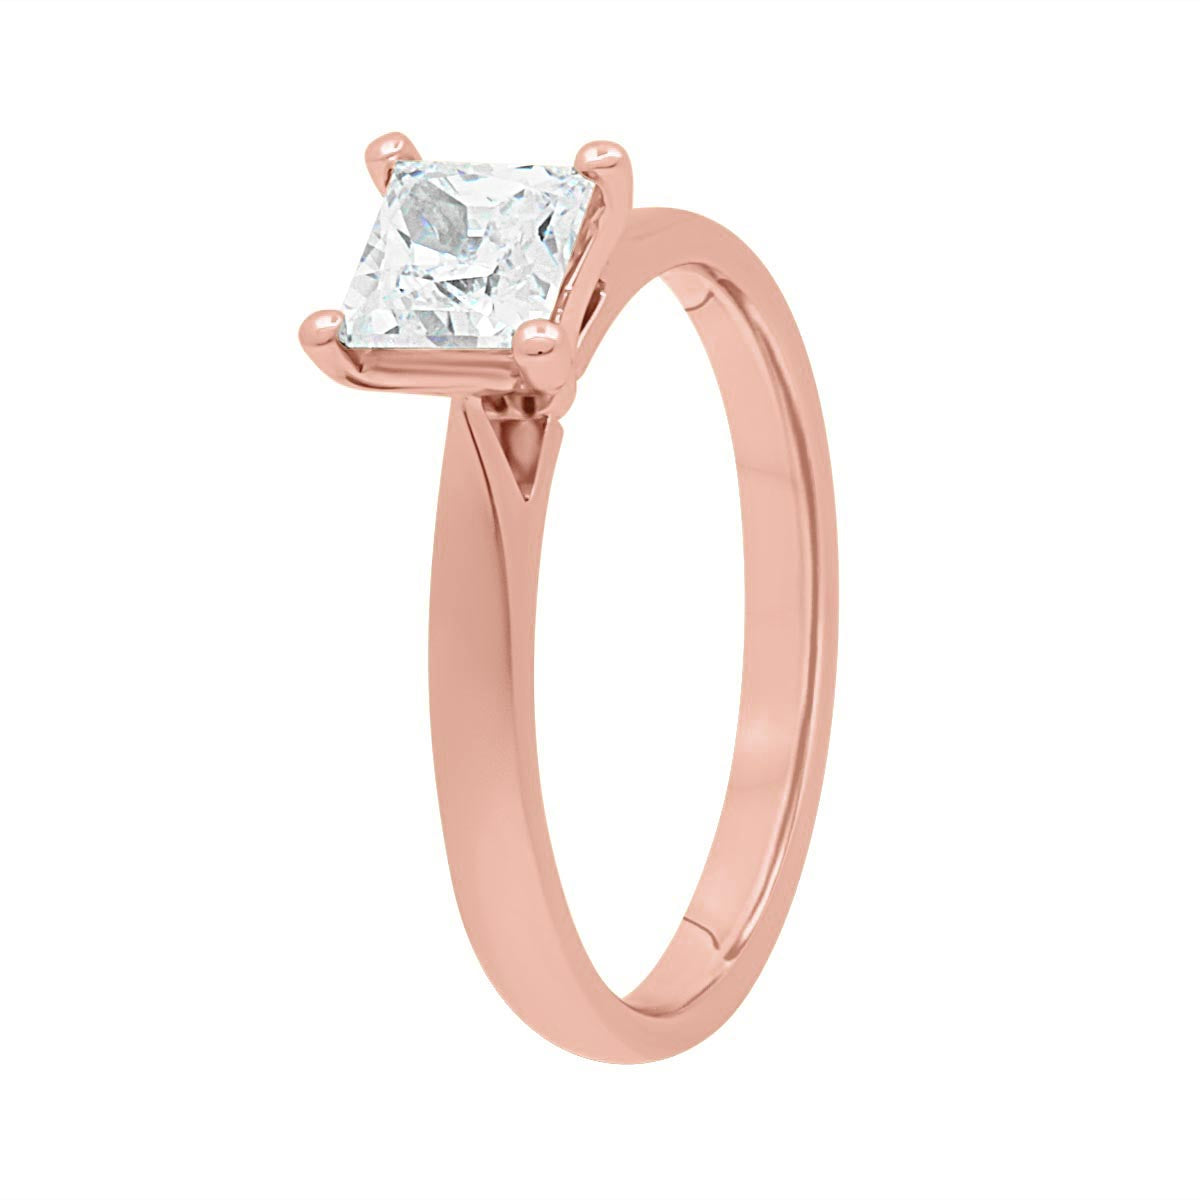 Princess Cut Diamond Ring in rose gold at an angled view